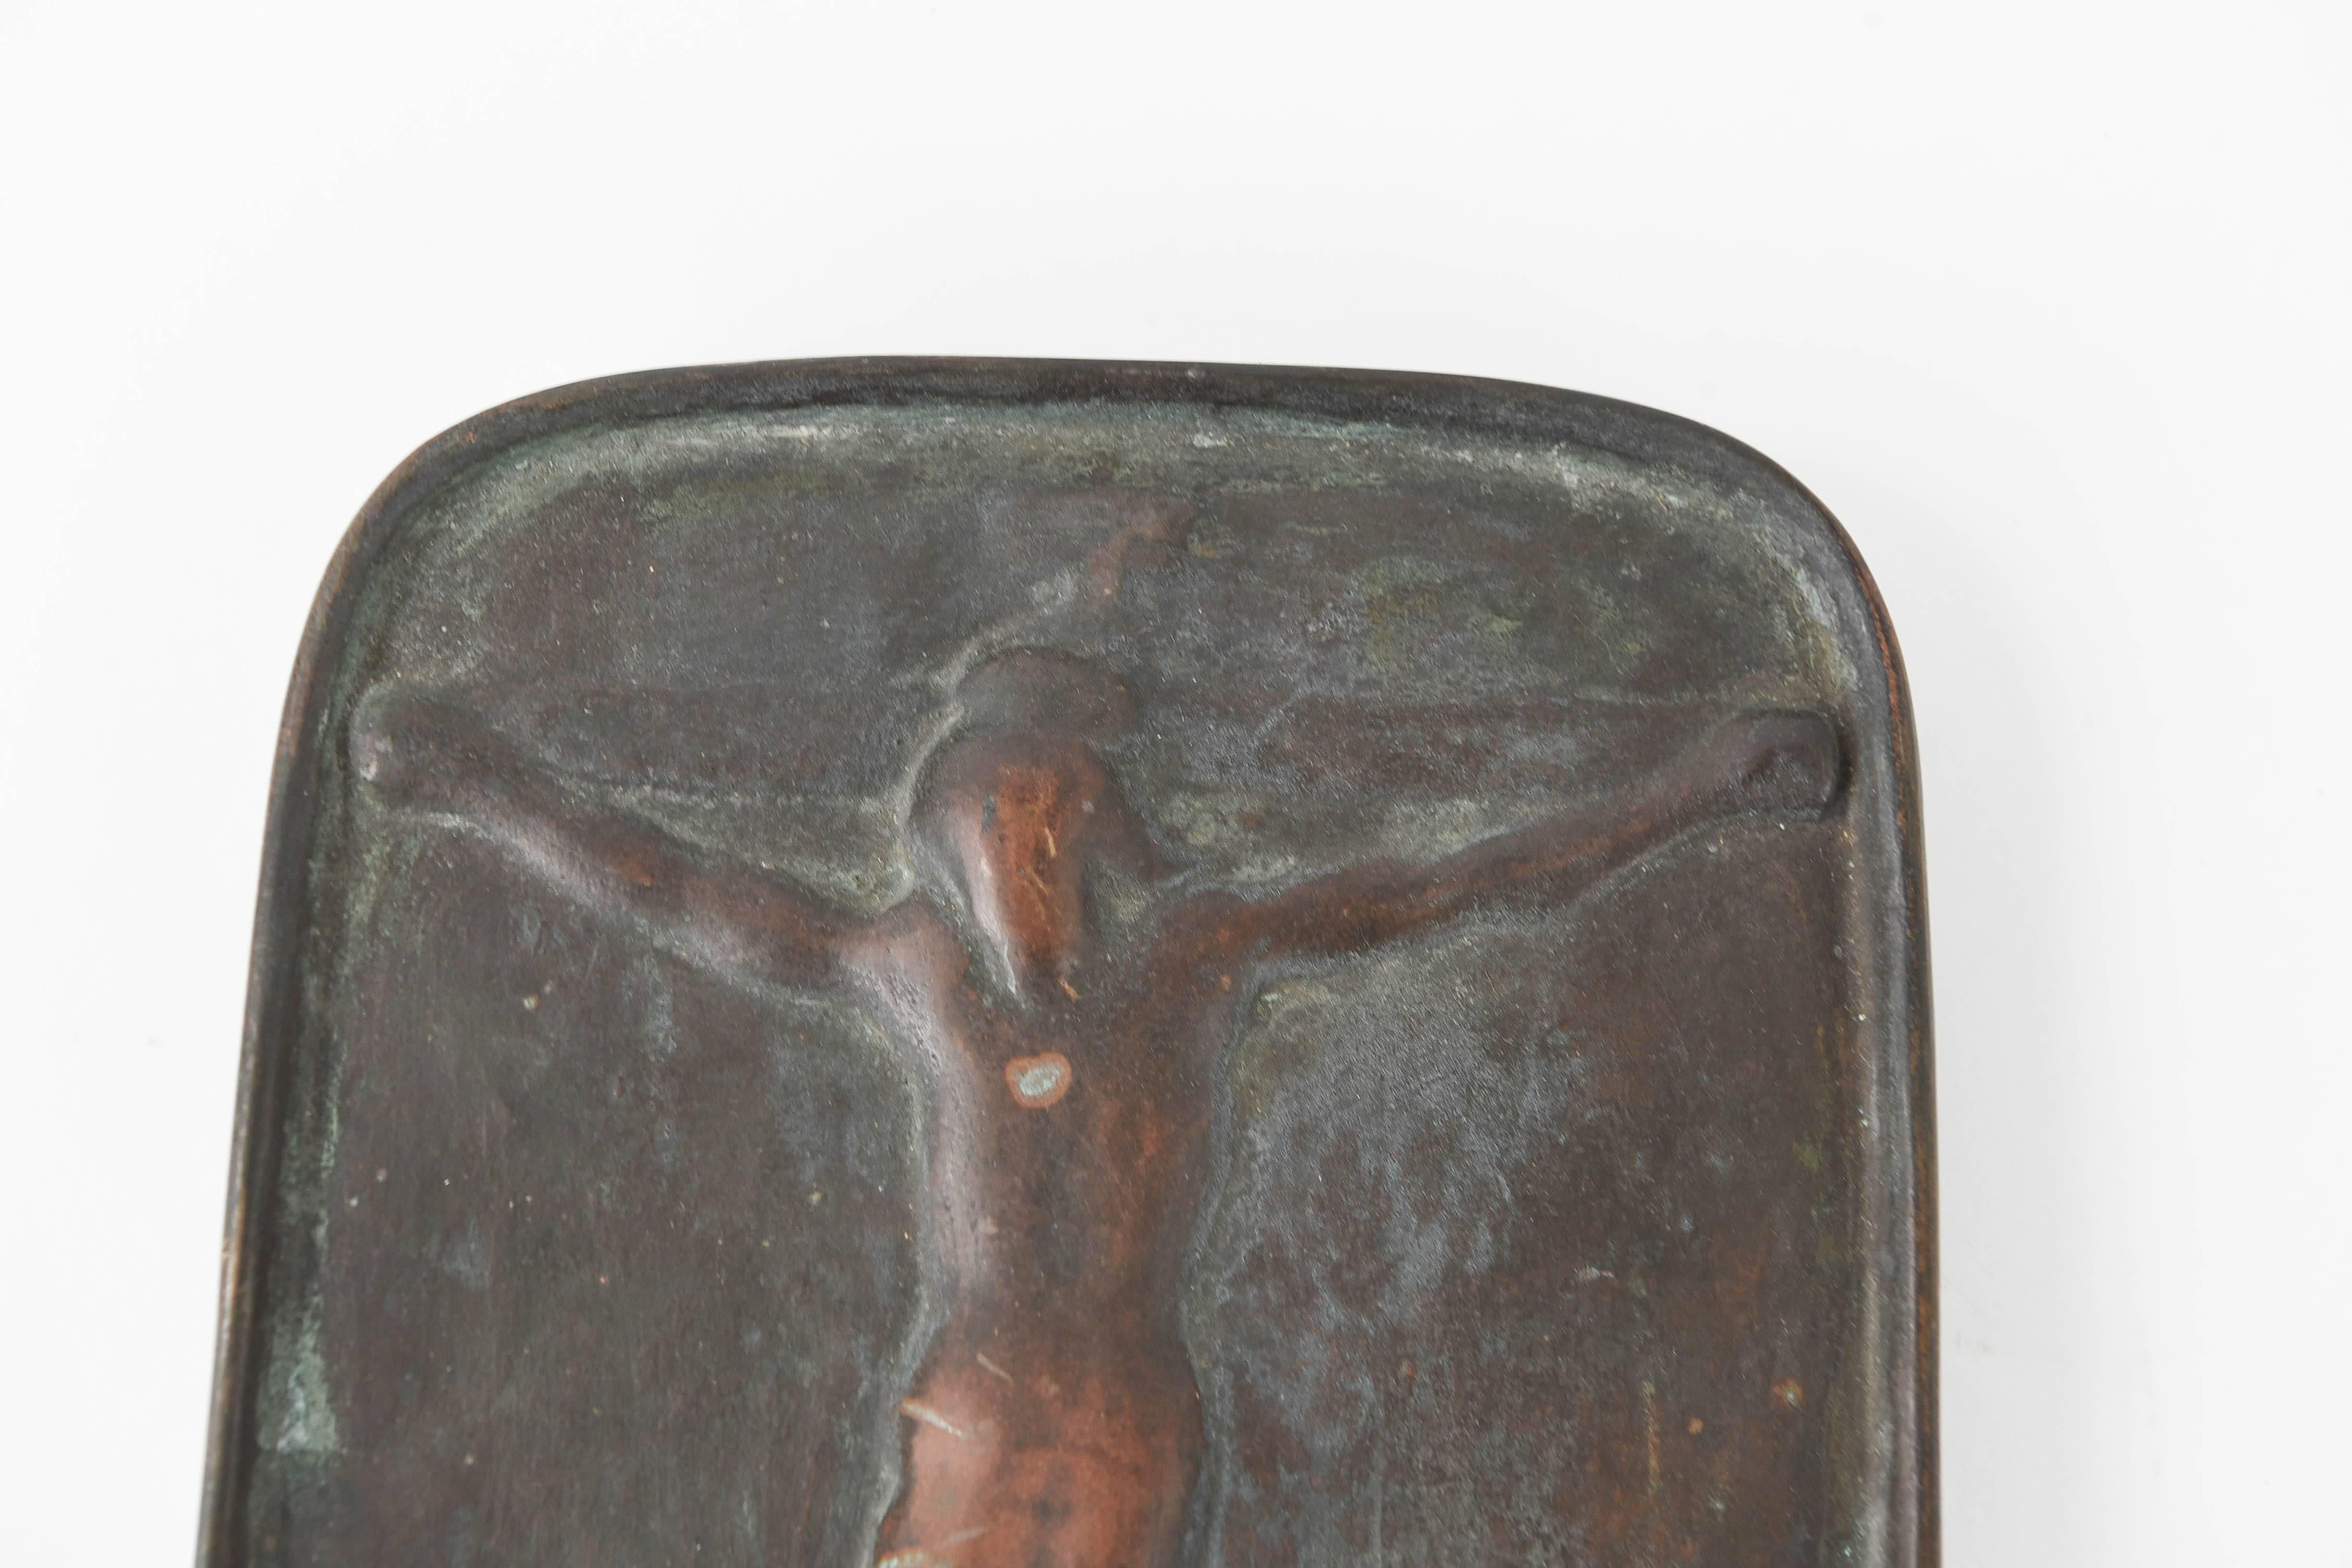 This 20th century Japanese Fumi-E bronze plaque is depicting the crucifixion of Jesus. The use of fumi-e began with the persecution of Christians in Nagasaki in 1629. Their use was officially abandoned when ports opened to foreigners on April 13,